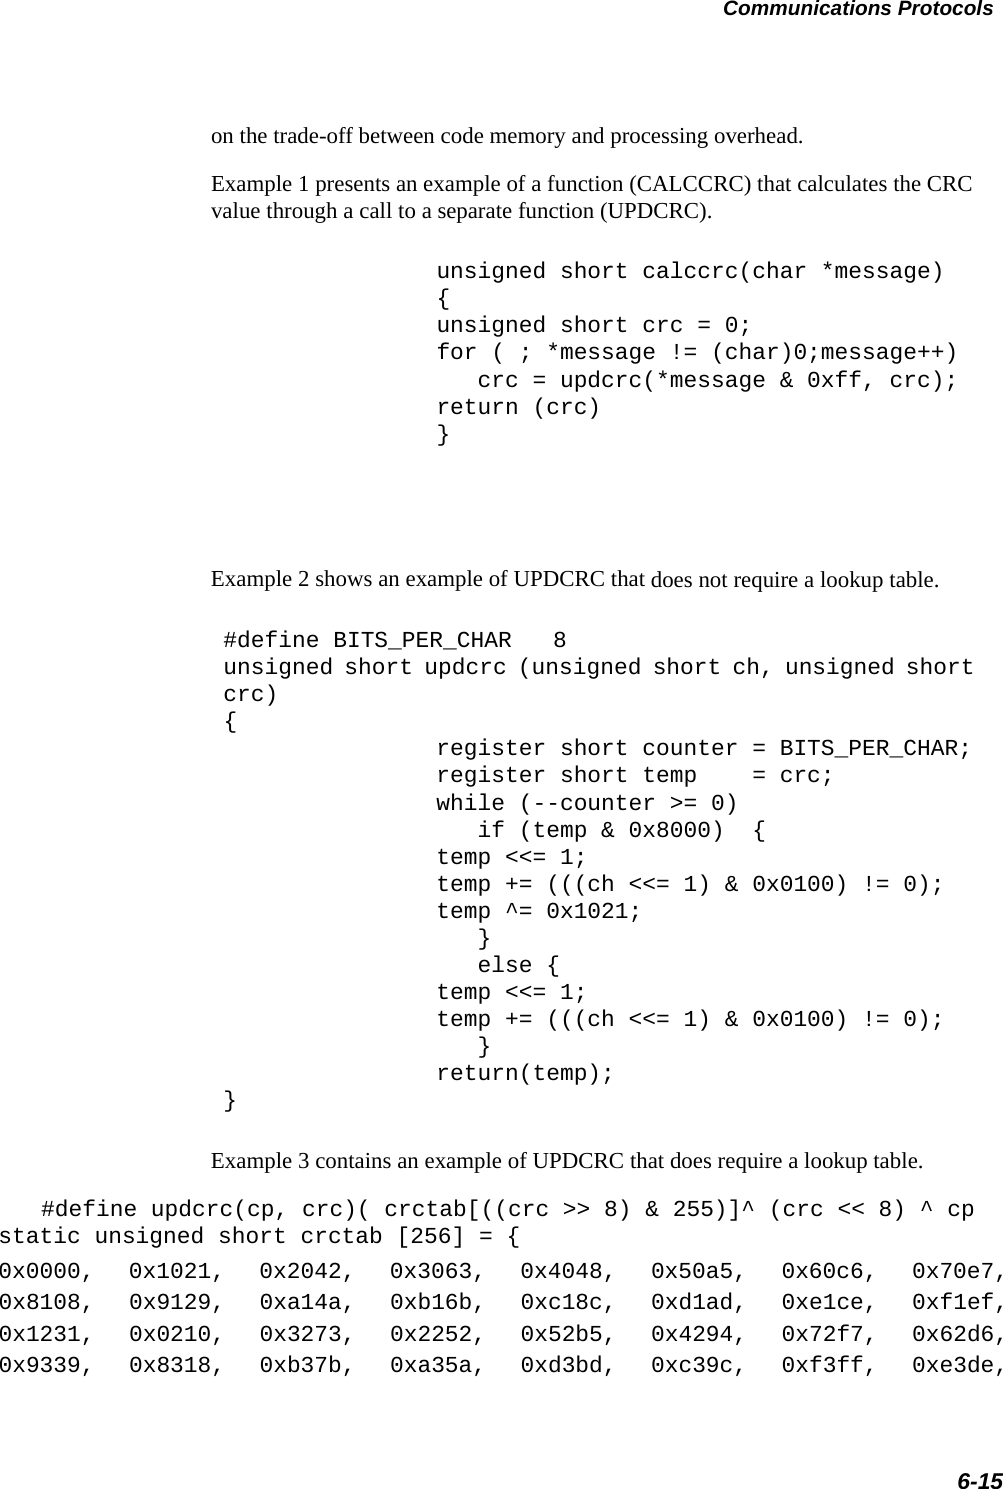 Communications Protocols6-15on the trade-off between code memory and processing overhead.Example 1 presents an example of a function (CALCCRC) that calculates the CRC value through a call to a separate function (UPDCRC).unsigned short calccrc(char *message){unsigned short crc = 0;for ( ; *message != (char)0;message++)   crc = updcrc(*message &amp; 0xff, crc);return (crc)}Example 2 shows an example of UPDCRC that does not require a lookup table.#define BITS_PER_CHAR   8unsigned short updcrc (unsigned short ch, unsigned short crc){register short counter = BITS_PER_CHAR;register short temp    = crc;while (--counter &gt;= 0)   if (temp &amp; 0x8000)  {temp &lt;&lt;= 1;temp += (((ch &lt;&lt;= 1) &amp; 0x0100) != 0);temp ^= 0x1021;   }   else {temp &lt;&lt;= 1;temp += (((ch &lt;&lt;= 1) &amp; 0x0100) != 0);   }return(temp);}Example 3 contains an example of UPDCRC that does require a lookup table. #define updcrc(cp, crc)( crctab[((crc &gt;&gt; 8) &amp; 255)]^ (crc &lt;&lt; 8) ^ cpstatic unsigned short crctab [256] = {0x0000, 0x1021, 0x2042, 0x3063, 0x4048, 0x50a5, 0x60c6, 0x70e7,0x8108, 0x9129, 0xa14a, 0xb16b, 0xc18c, 0xd1ad, 0xe1ce, 0xf1ef,0x1231, 0x0210, 0x3273, 0x2252, 0x52b5, 0x4294, 0x72f7, 0x62d6,0x9339, 0x8318, 0xb37b, 0xa35a, 0xd3bd, 0xc39c, 0xf3ff, 0xe3de,